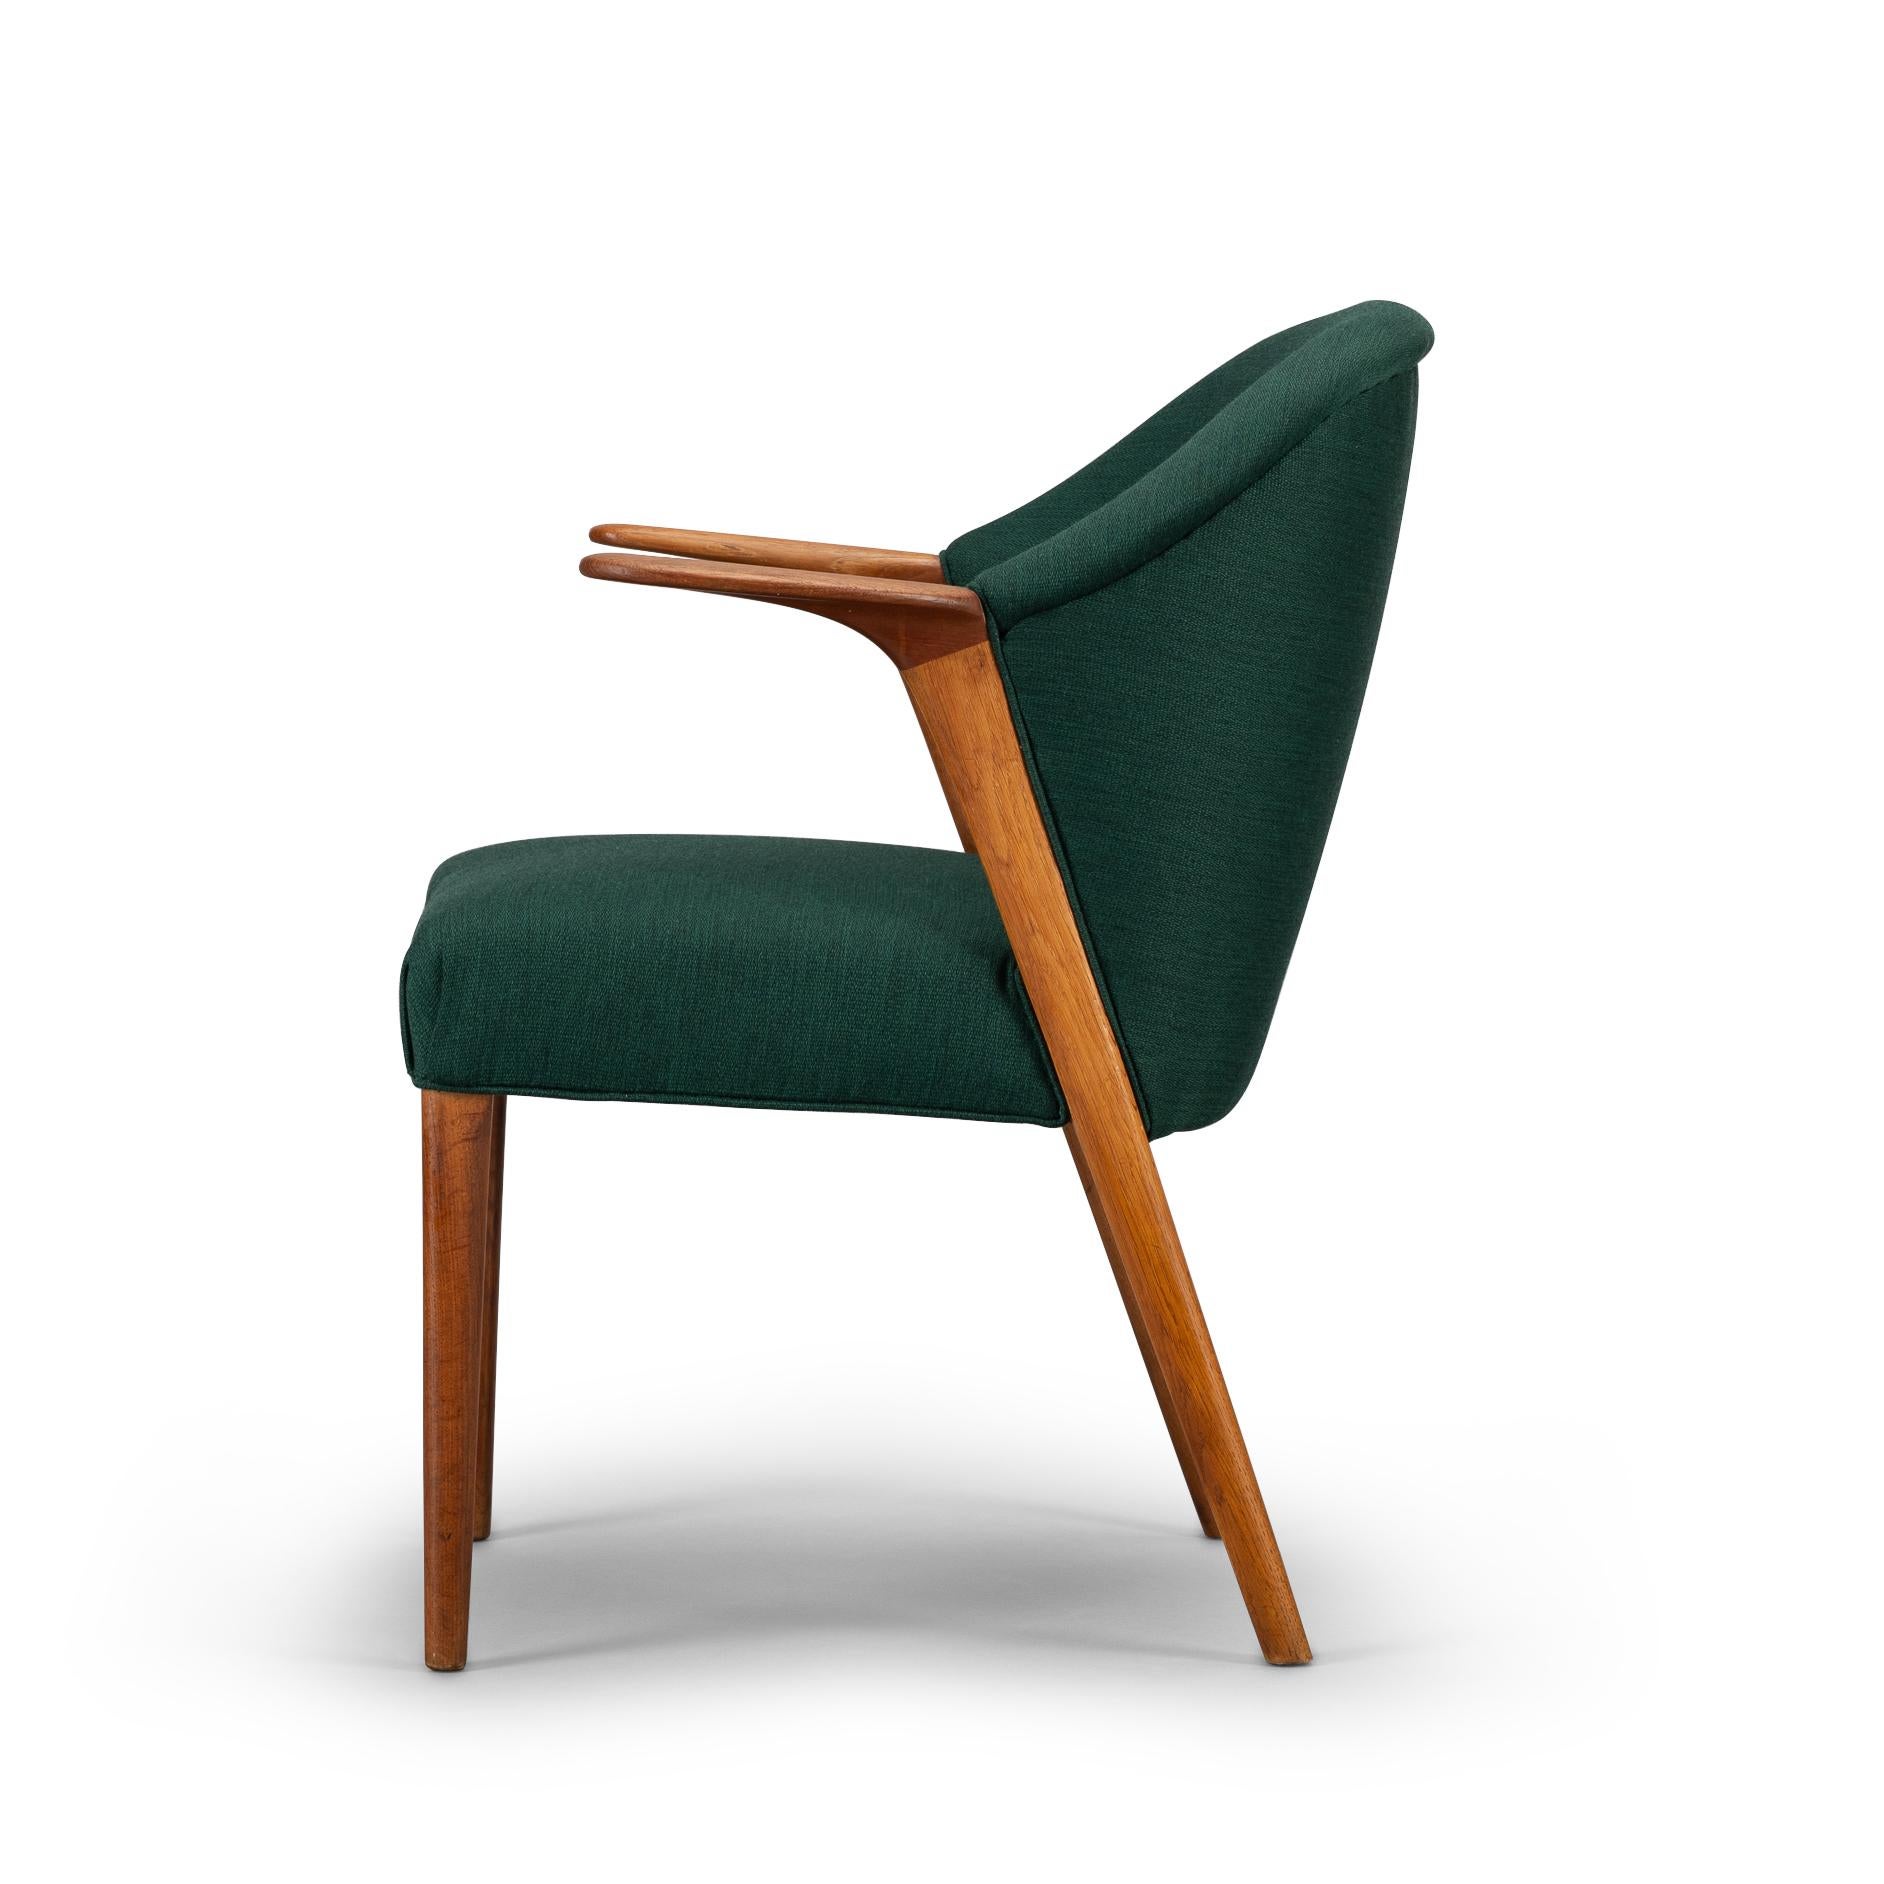 Elegantly designed solid oak armrests give flavour to this chair. Made in Denmark in the 1950s by Larsen & Søn Snedkermestre this particular one is newly upholstered with a Kvadrat Balder 3 fabric that gives it a hip look. The Kvadrat Balder 3 is a